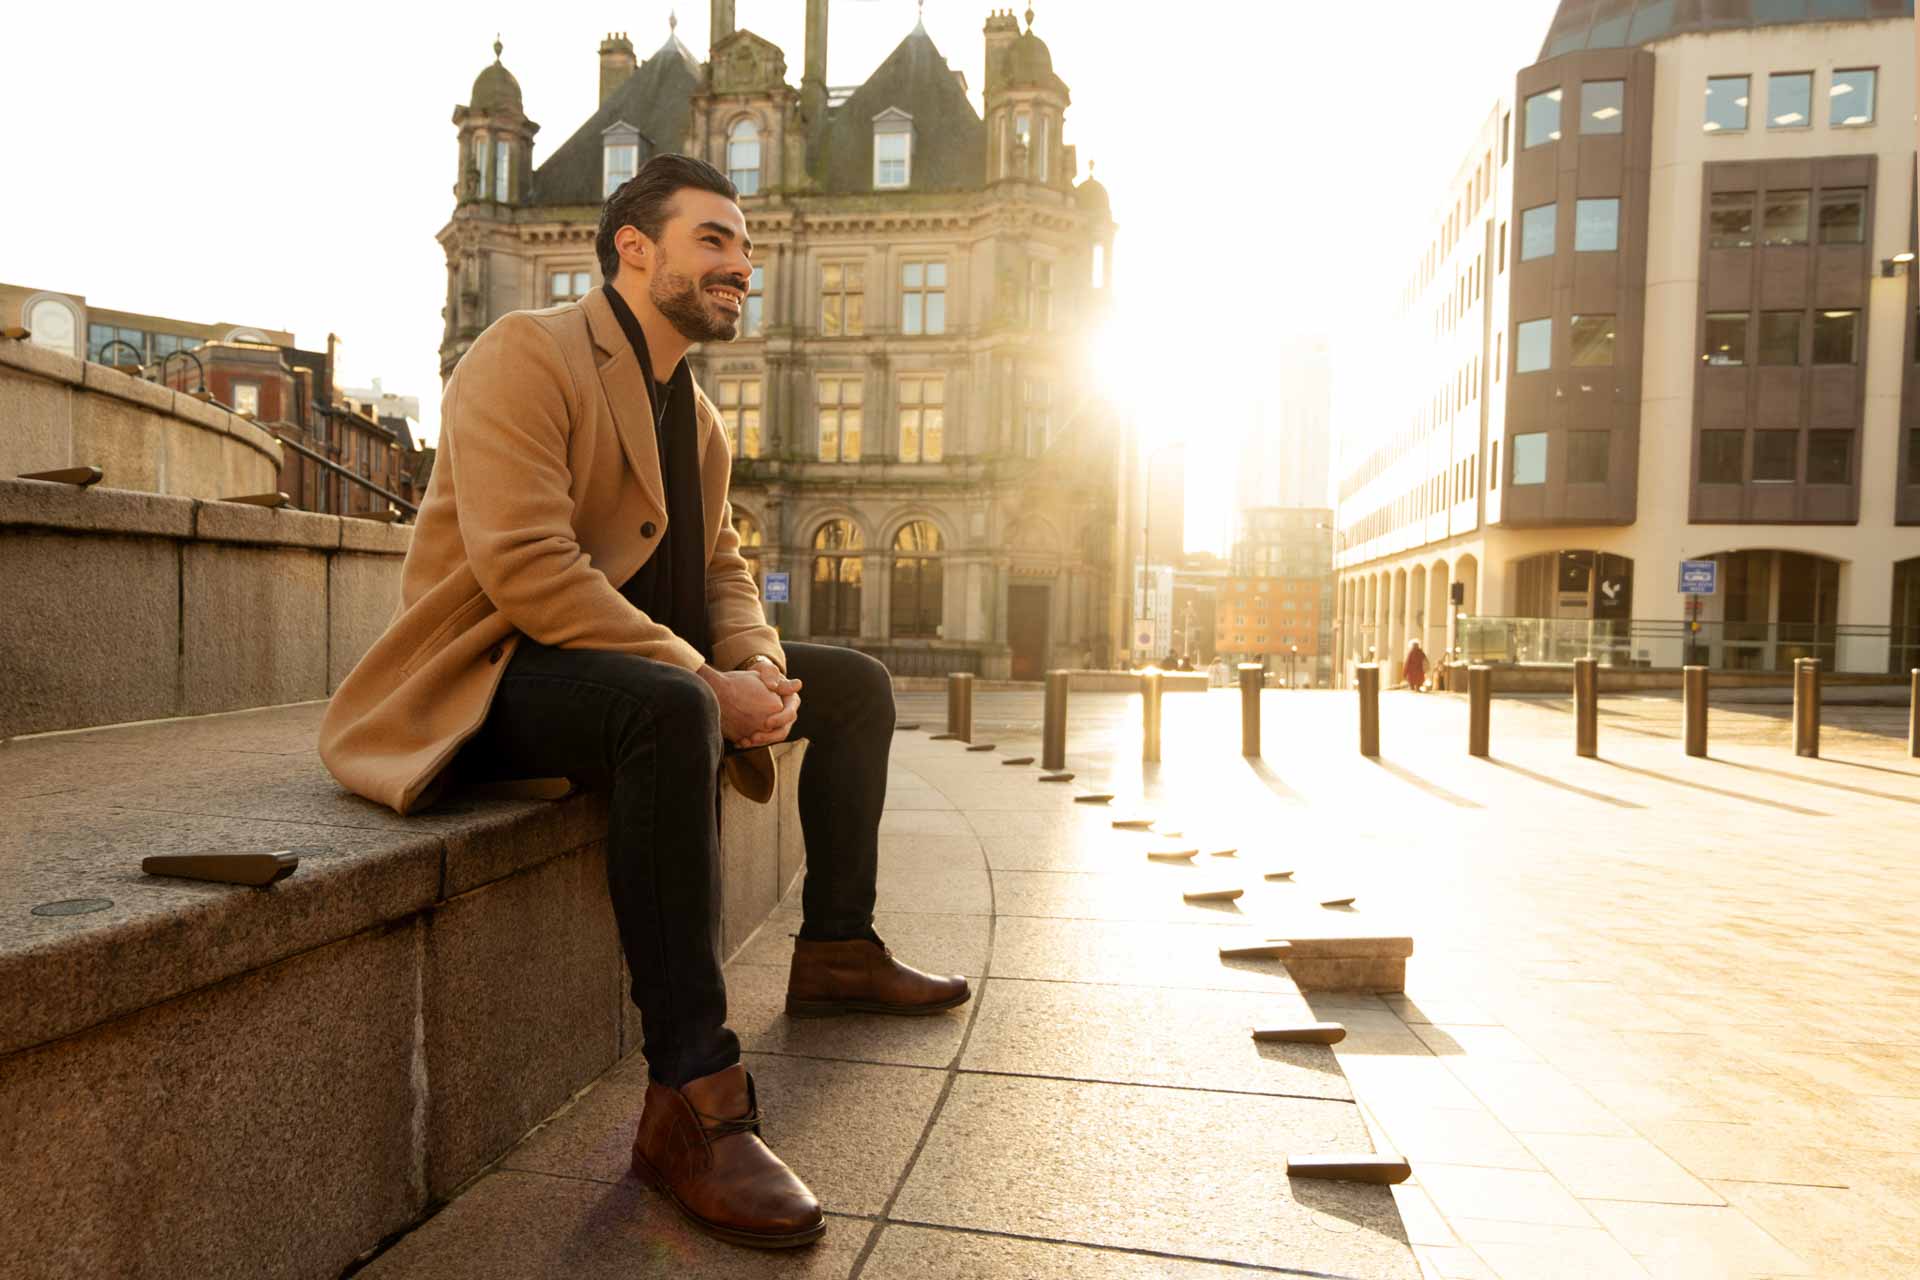 outdoor fashion portrait of a man smiling in Birmingham city centre